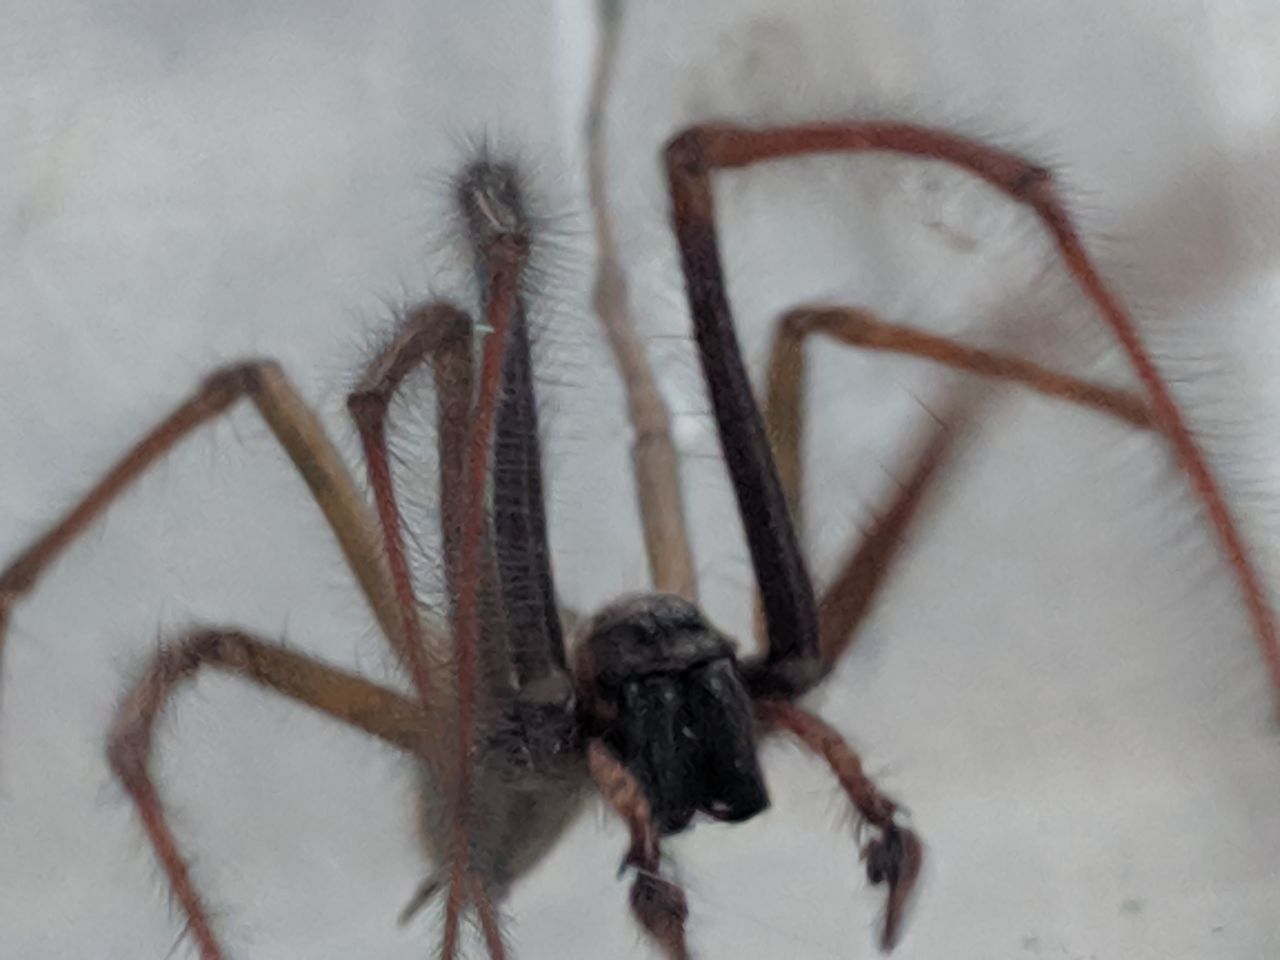 CLOSE-UP OF SPIDER ON THE WALL